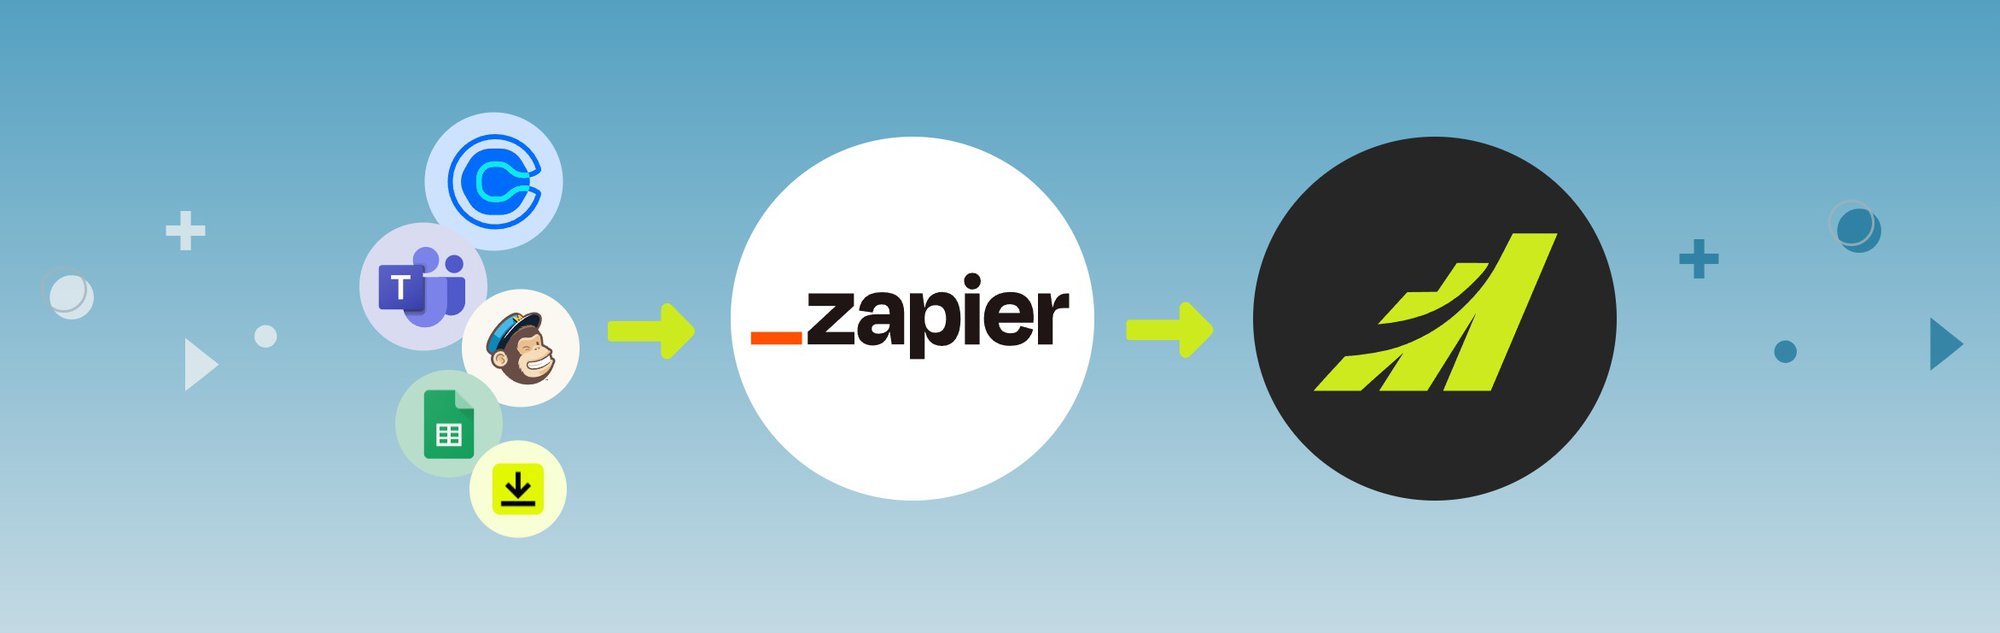 Automate Your Workflow with Maximizer’s Zapier Integration - no coding required. cover